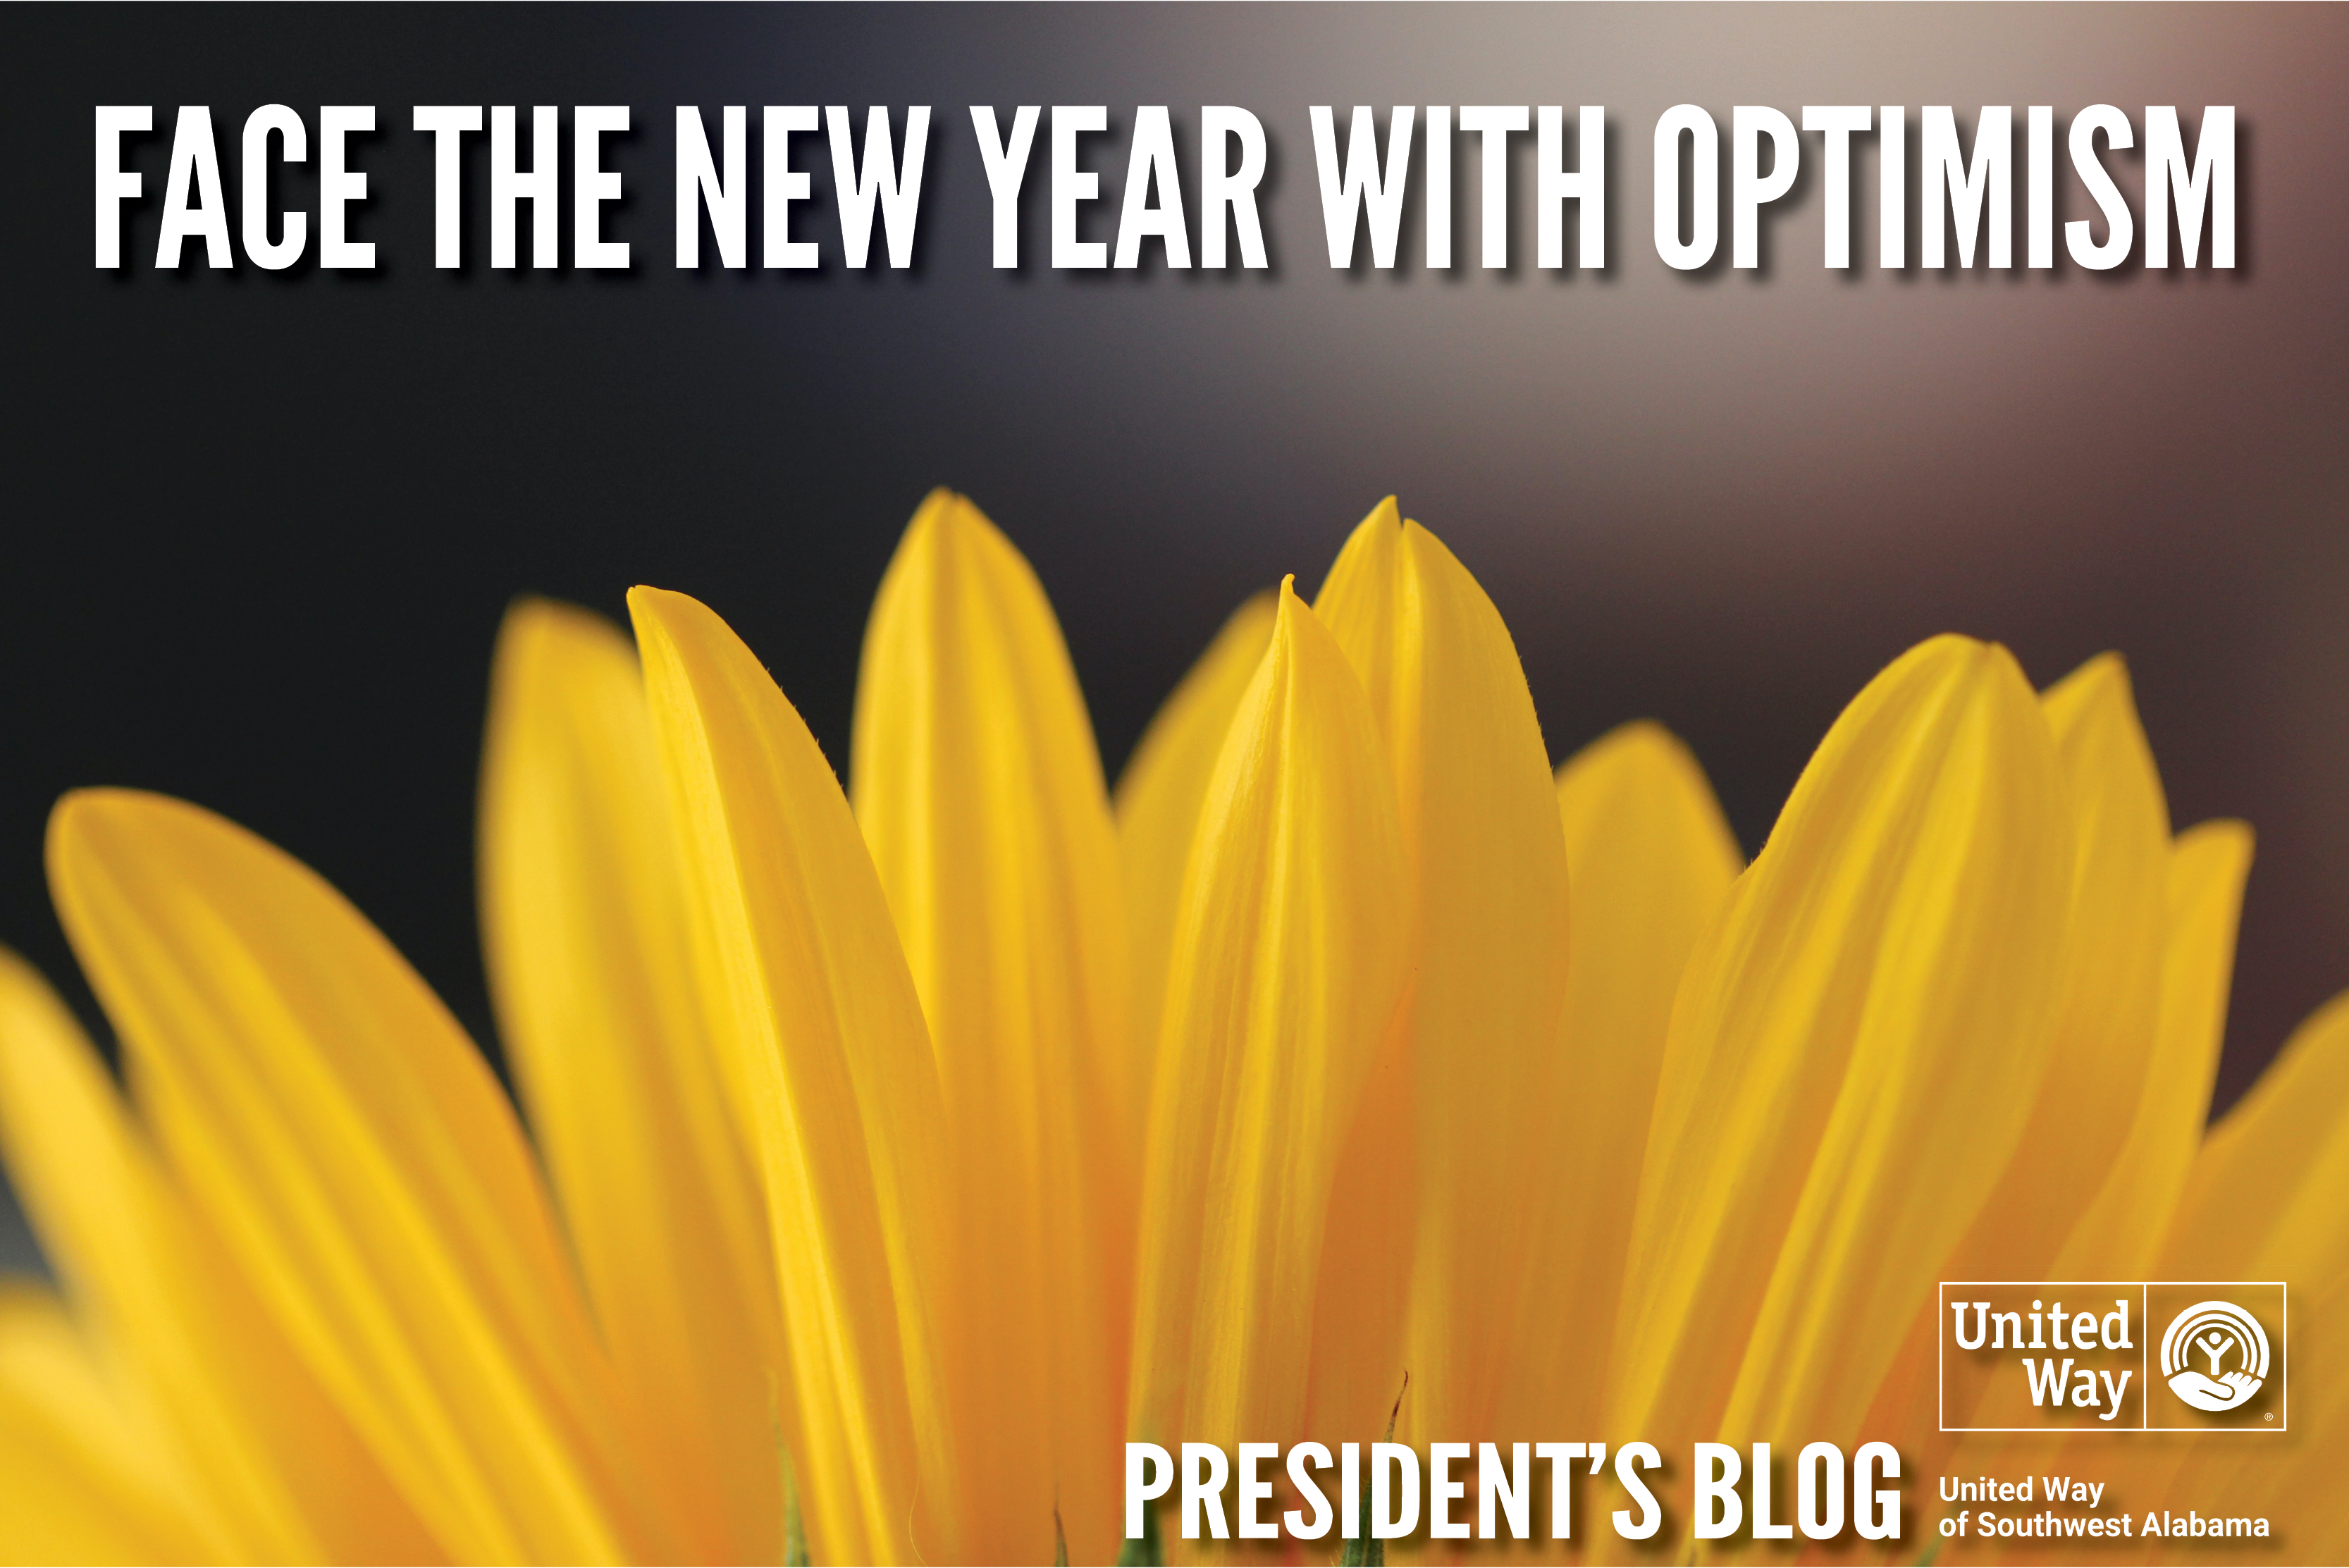 January President's Blog - Face the New Year with Optimism